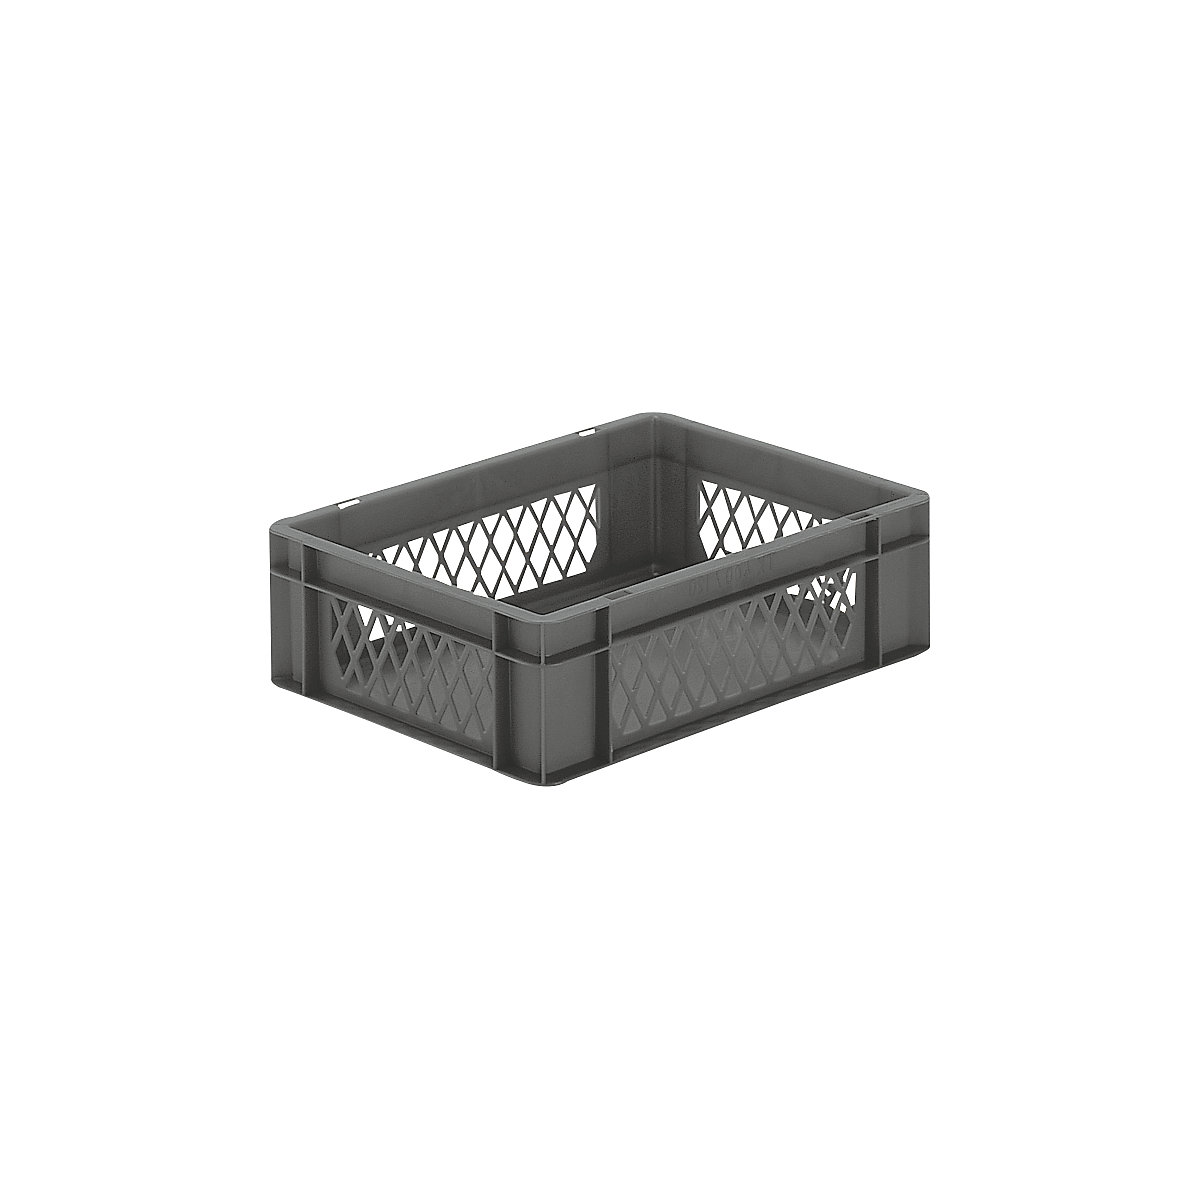 Euro stacking container, perforated walls, closed base, LxWxH 400 x 300 x 120 mm, grey, pack of 5-6